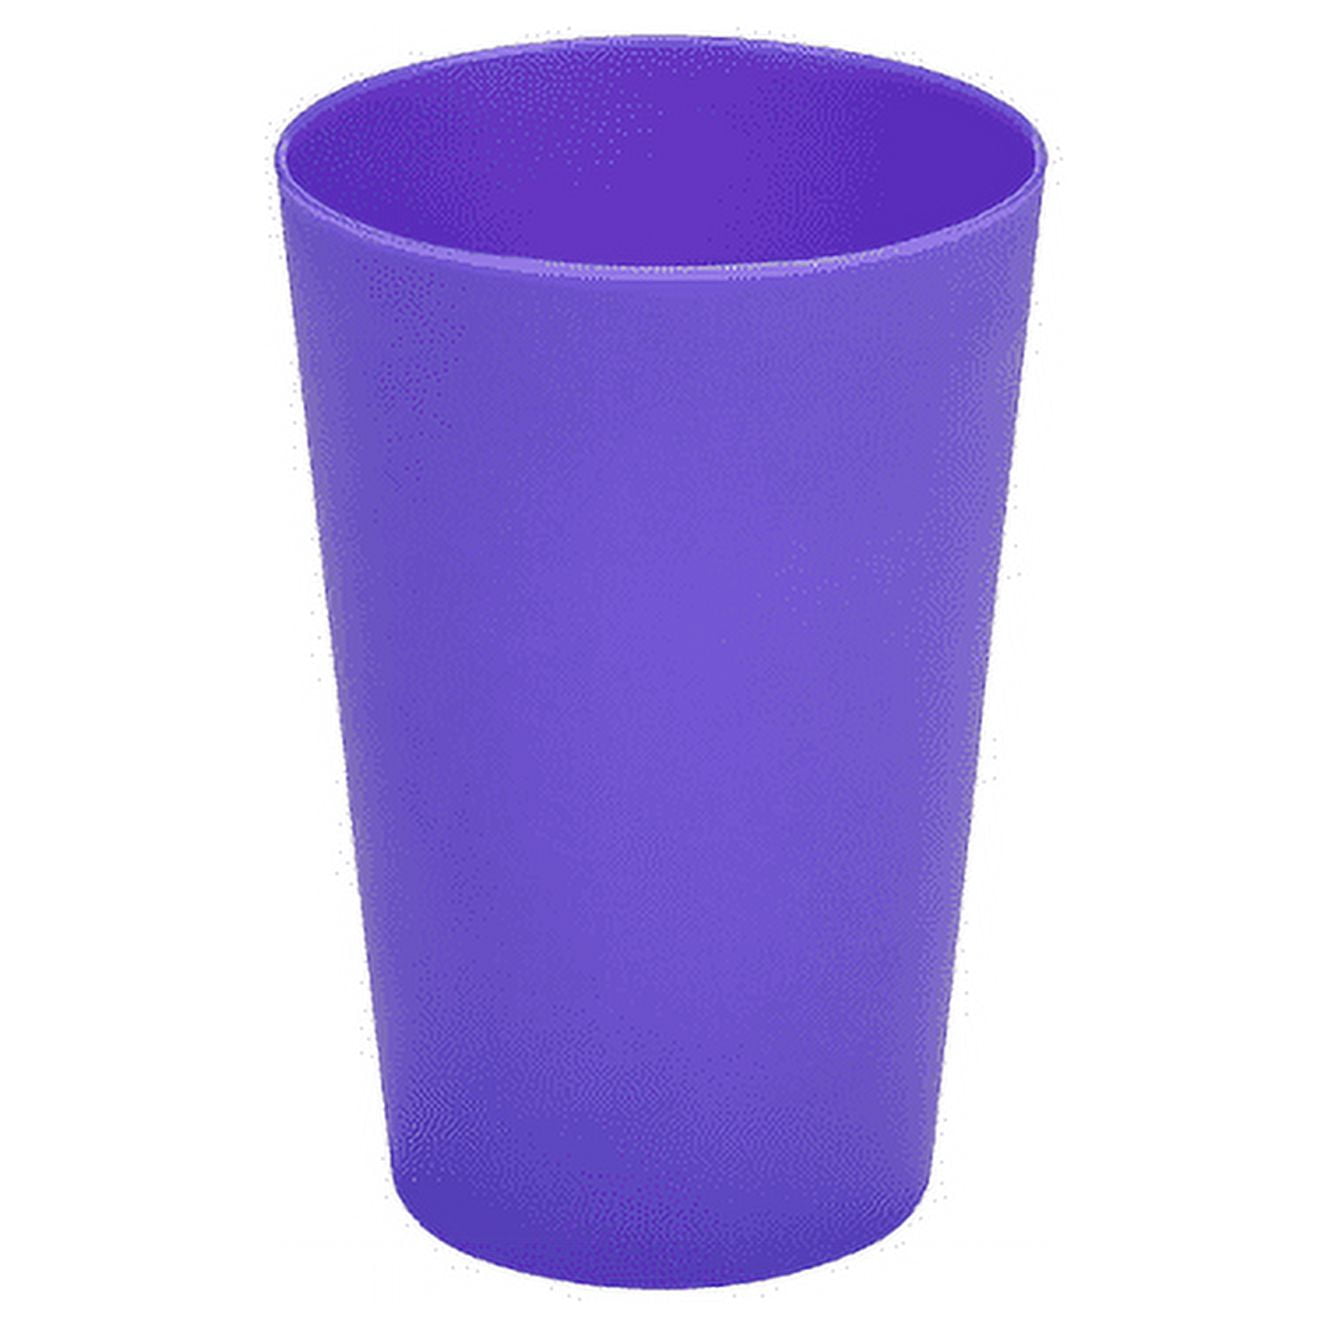 REALWAY Plastic Tumblers, Unbreakable Ribbed Glasses,17OZ Origami Style  Drinking Cup, Reusable Plast…See more REALWAY Plastic Tumblers, Unbreakable